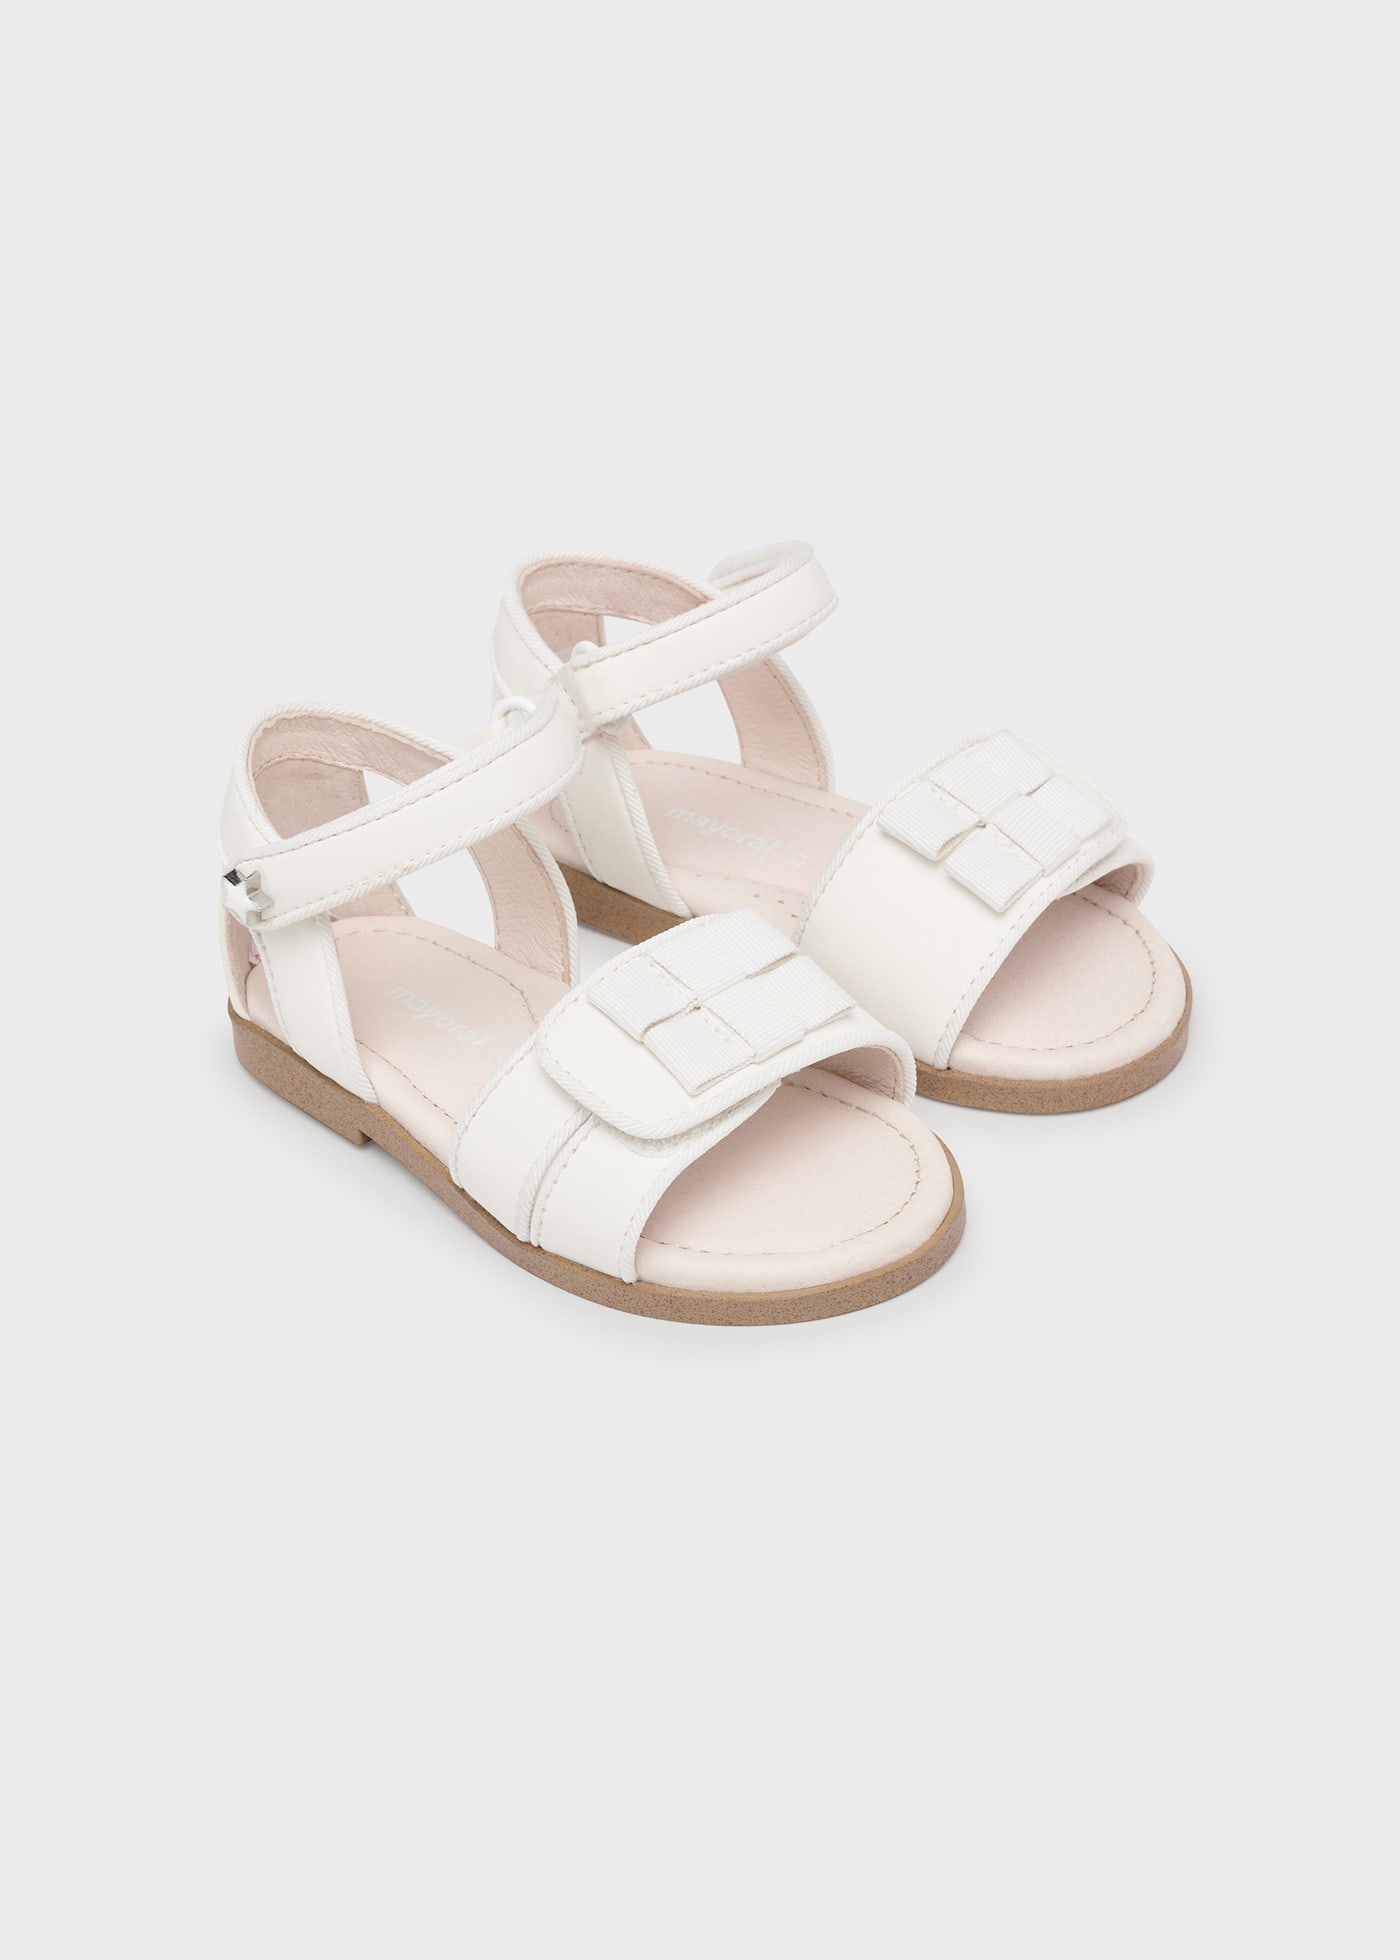 Sandals with sustainable leather lining and insole baby